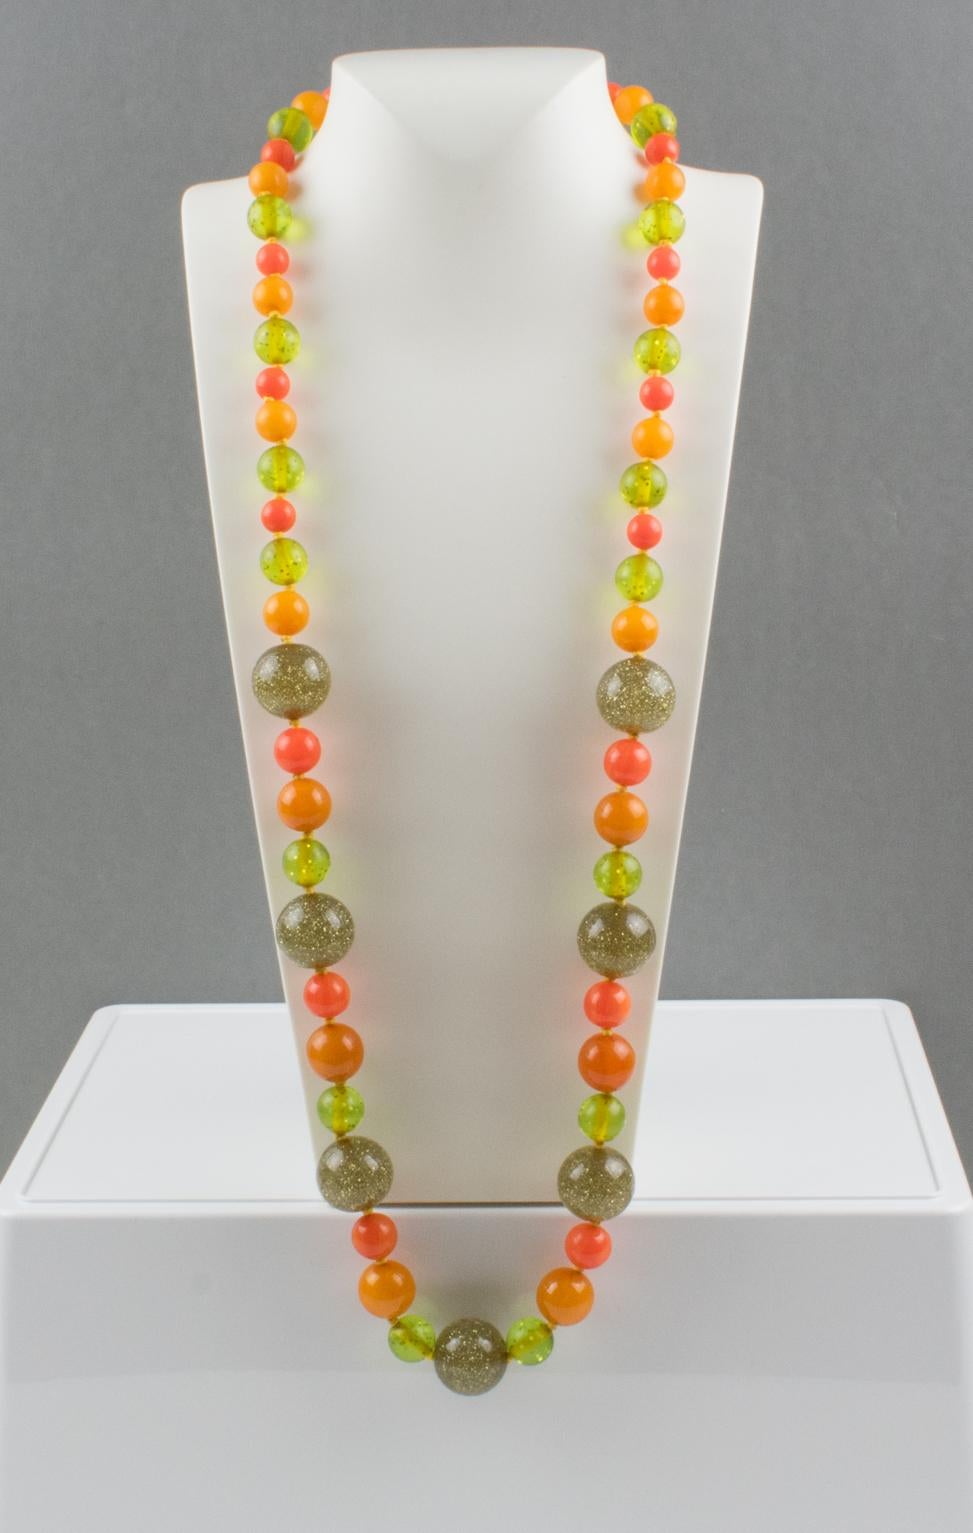 Bakelite and Lucite Extra Long Necklace with Orange, Green and Glitter Beads For Sale 2